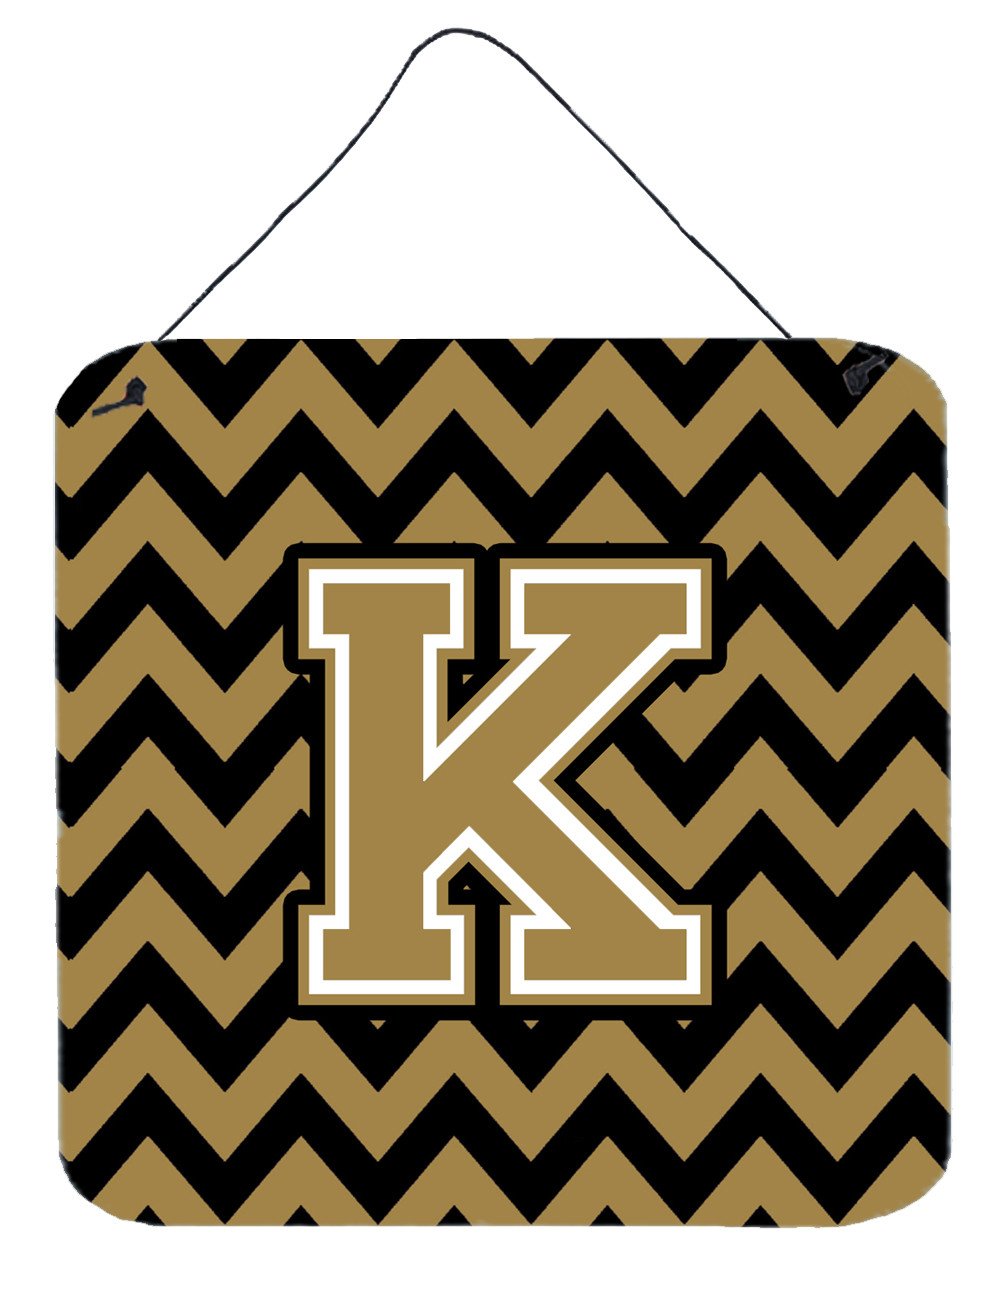 Letter K Chevron Black and Gold  Wall or Door Hanging Prints CJ1050-KDS66 by Caroline's Treasures